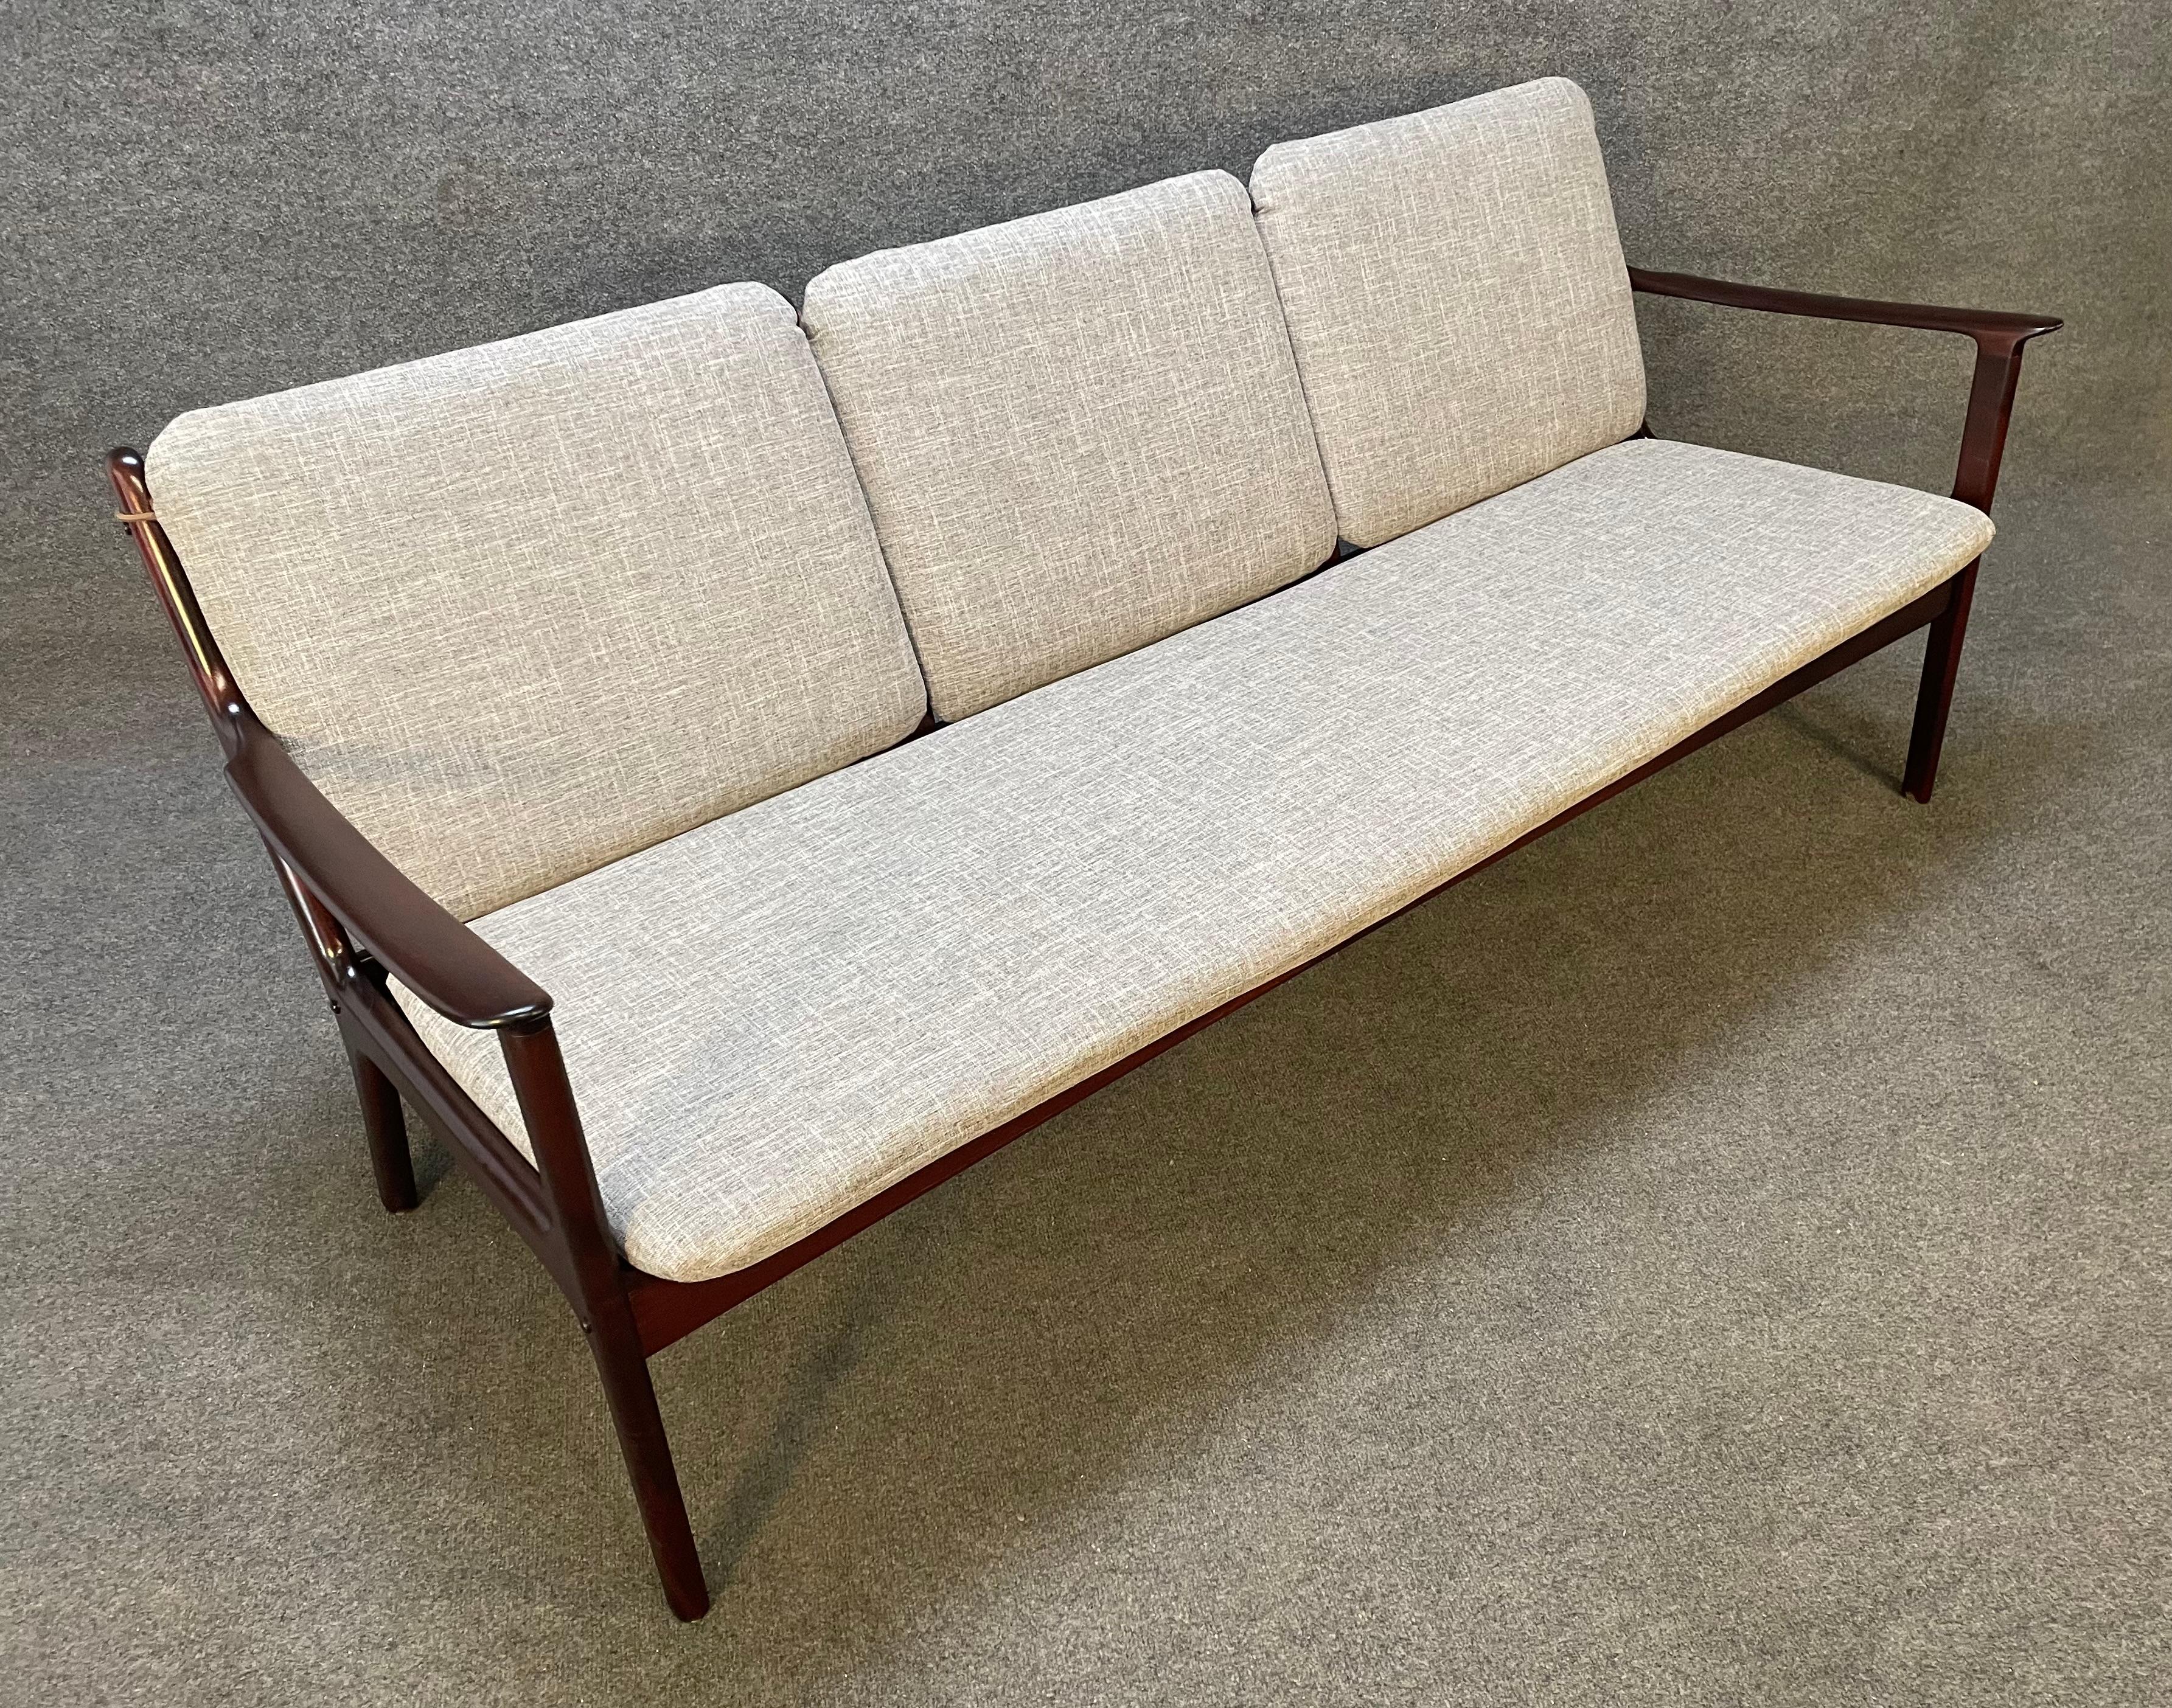 Vintage Danish Mid Century Mahogany Sofa by Ole Wanscher for Poul Jeppesen For Sale 4